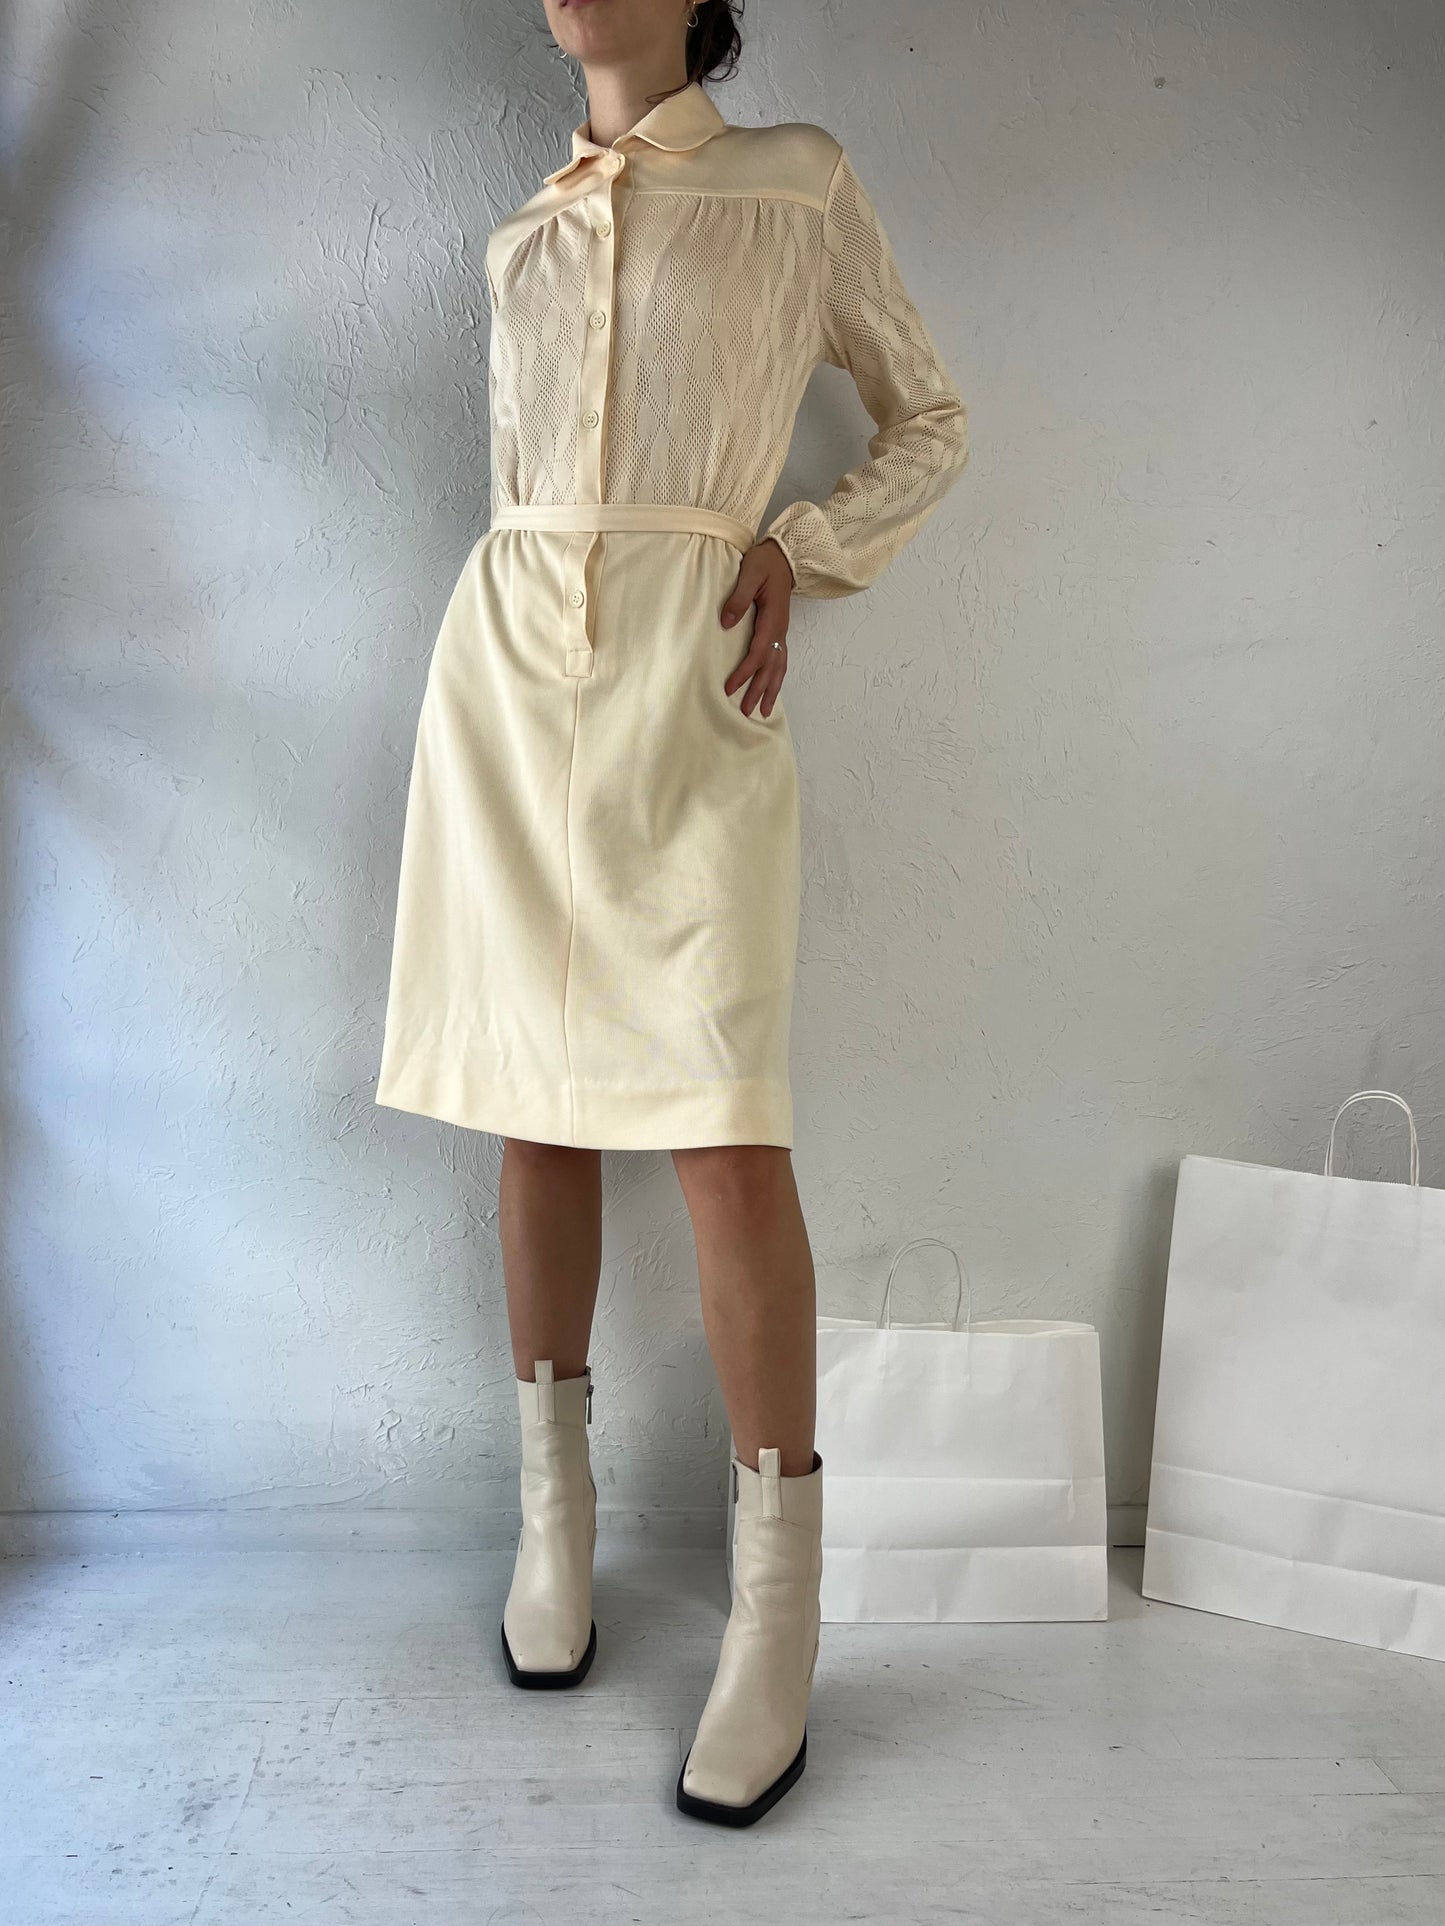 80s 'Stage T' Cream Polyester Collared Dress / Small